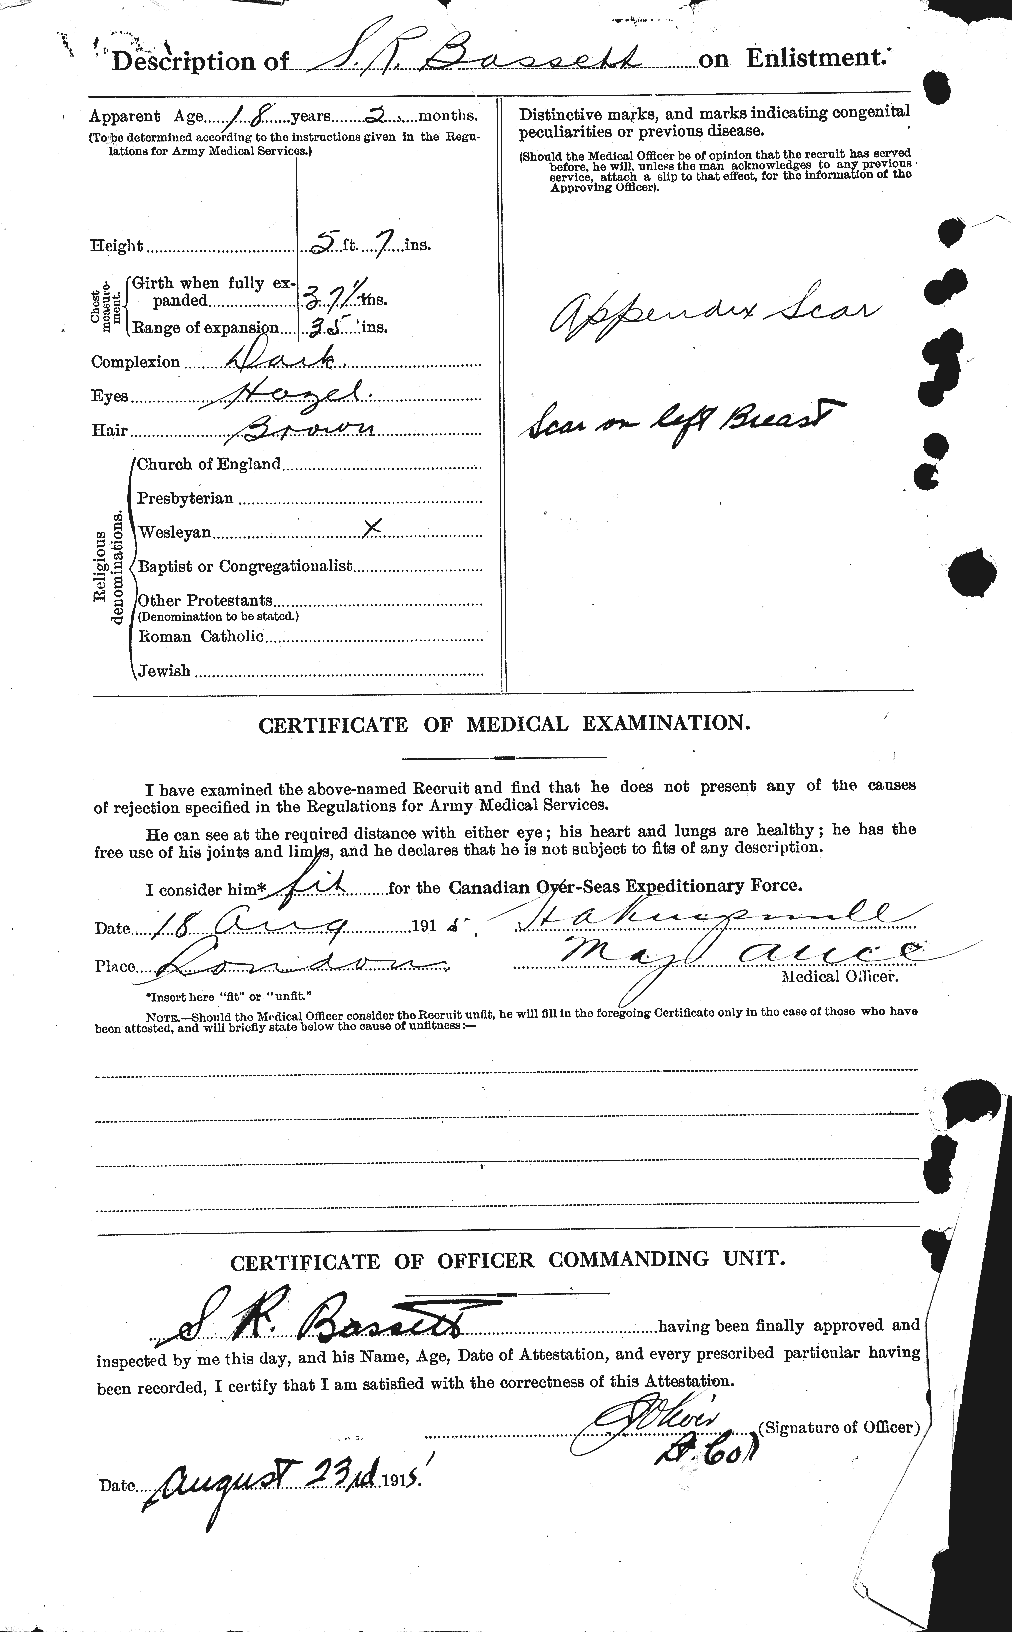 Personnel Records of the First World War - CEF 228331b